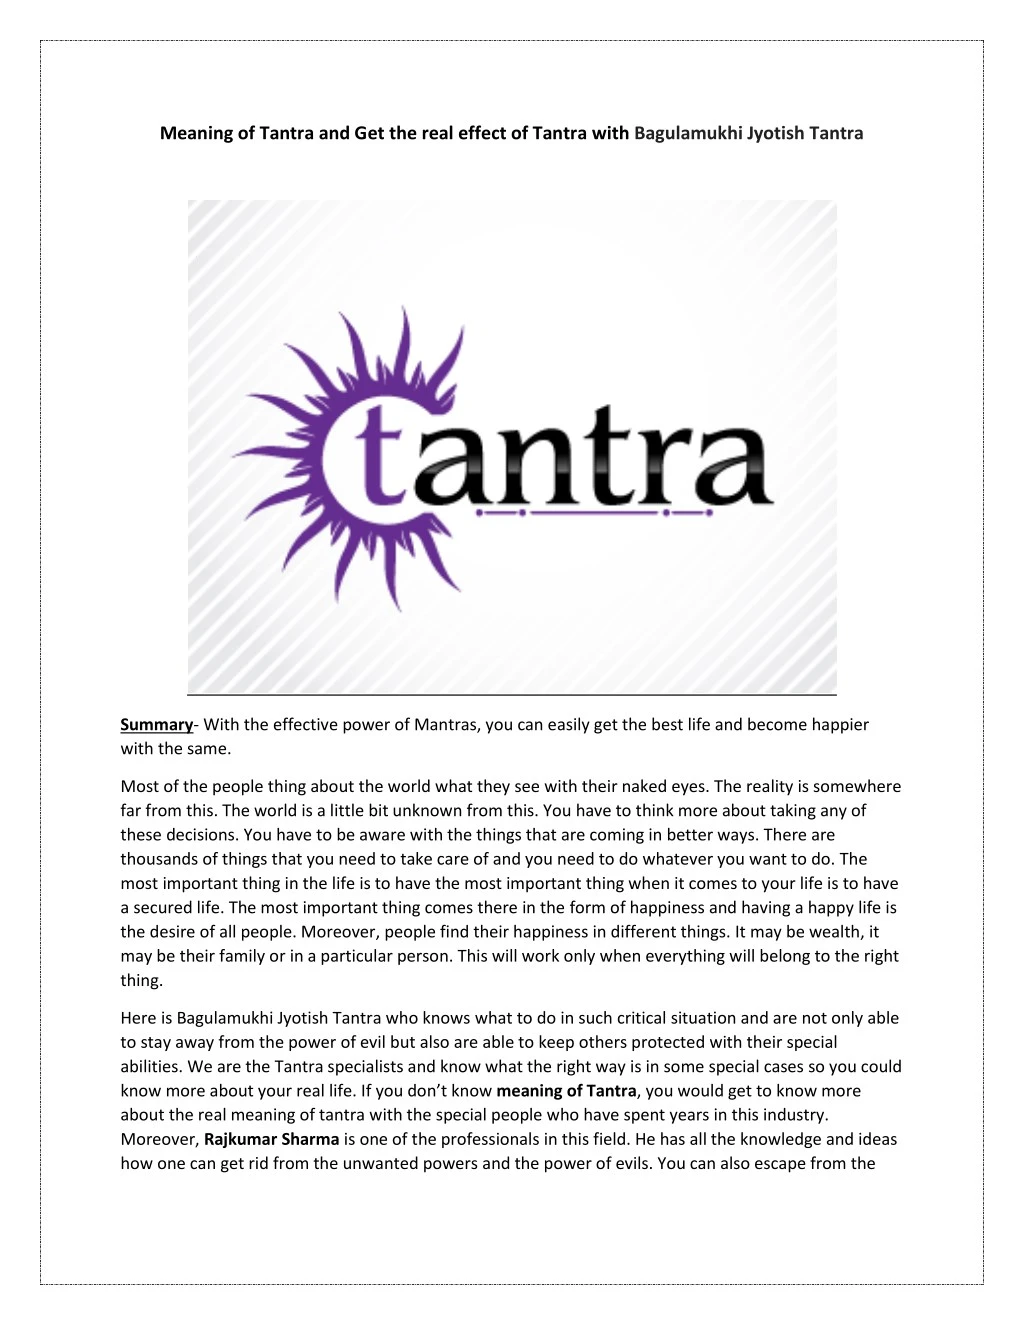 meaning of tantra and get the real effect